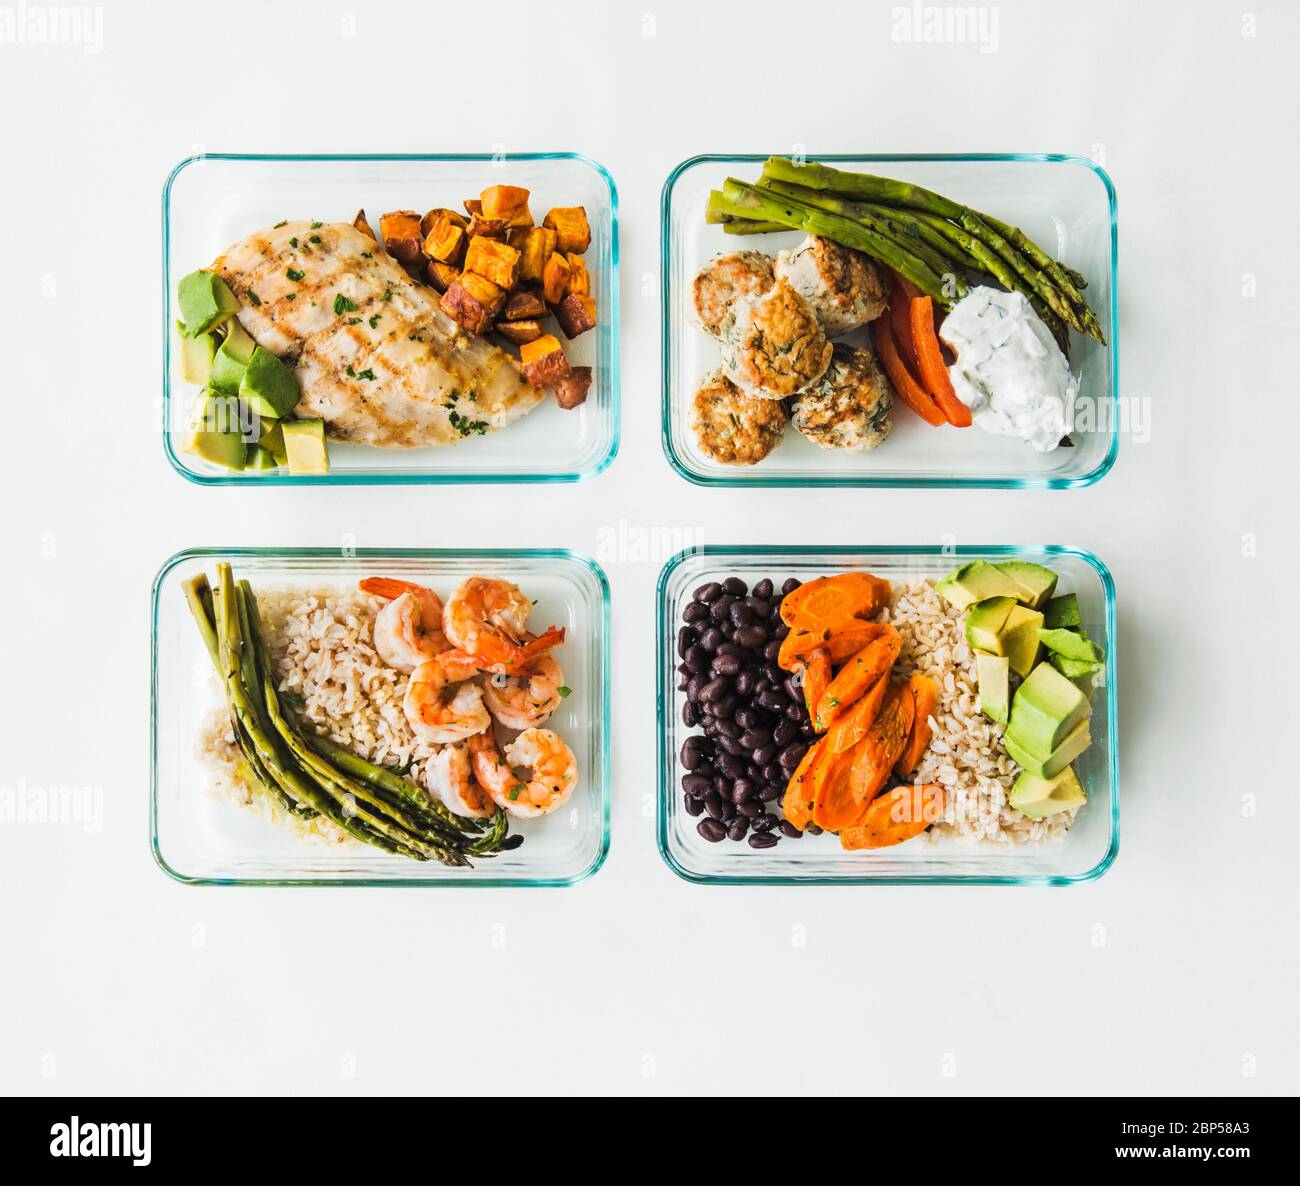 Meal prep containers filled with healthy lunches Stock Photo